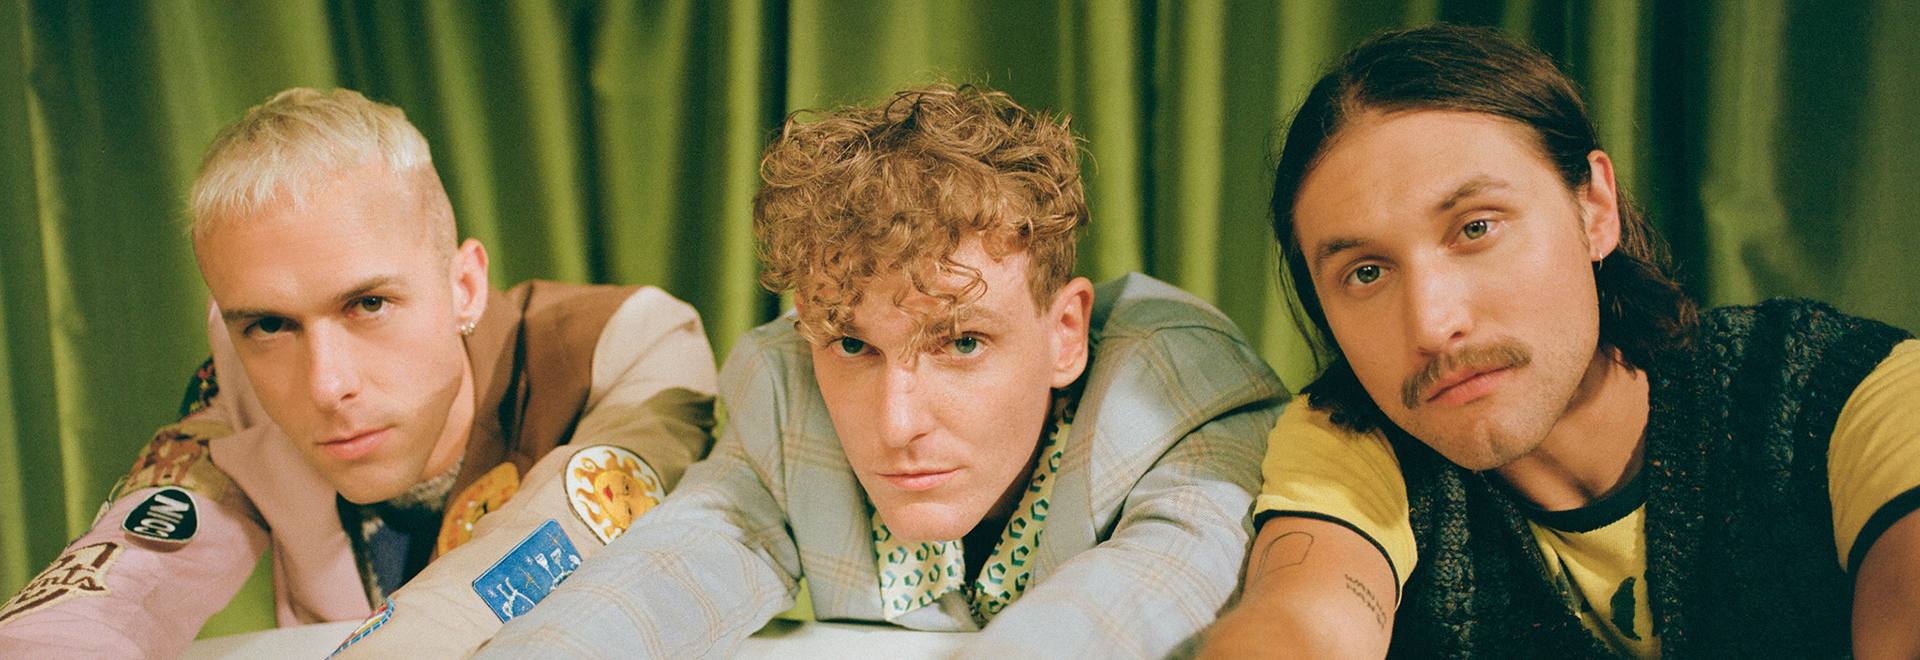 COIN interview